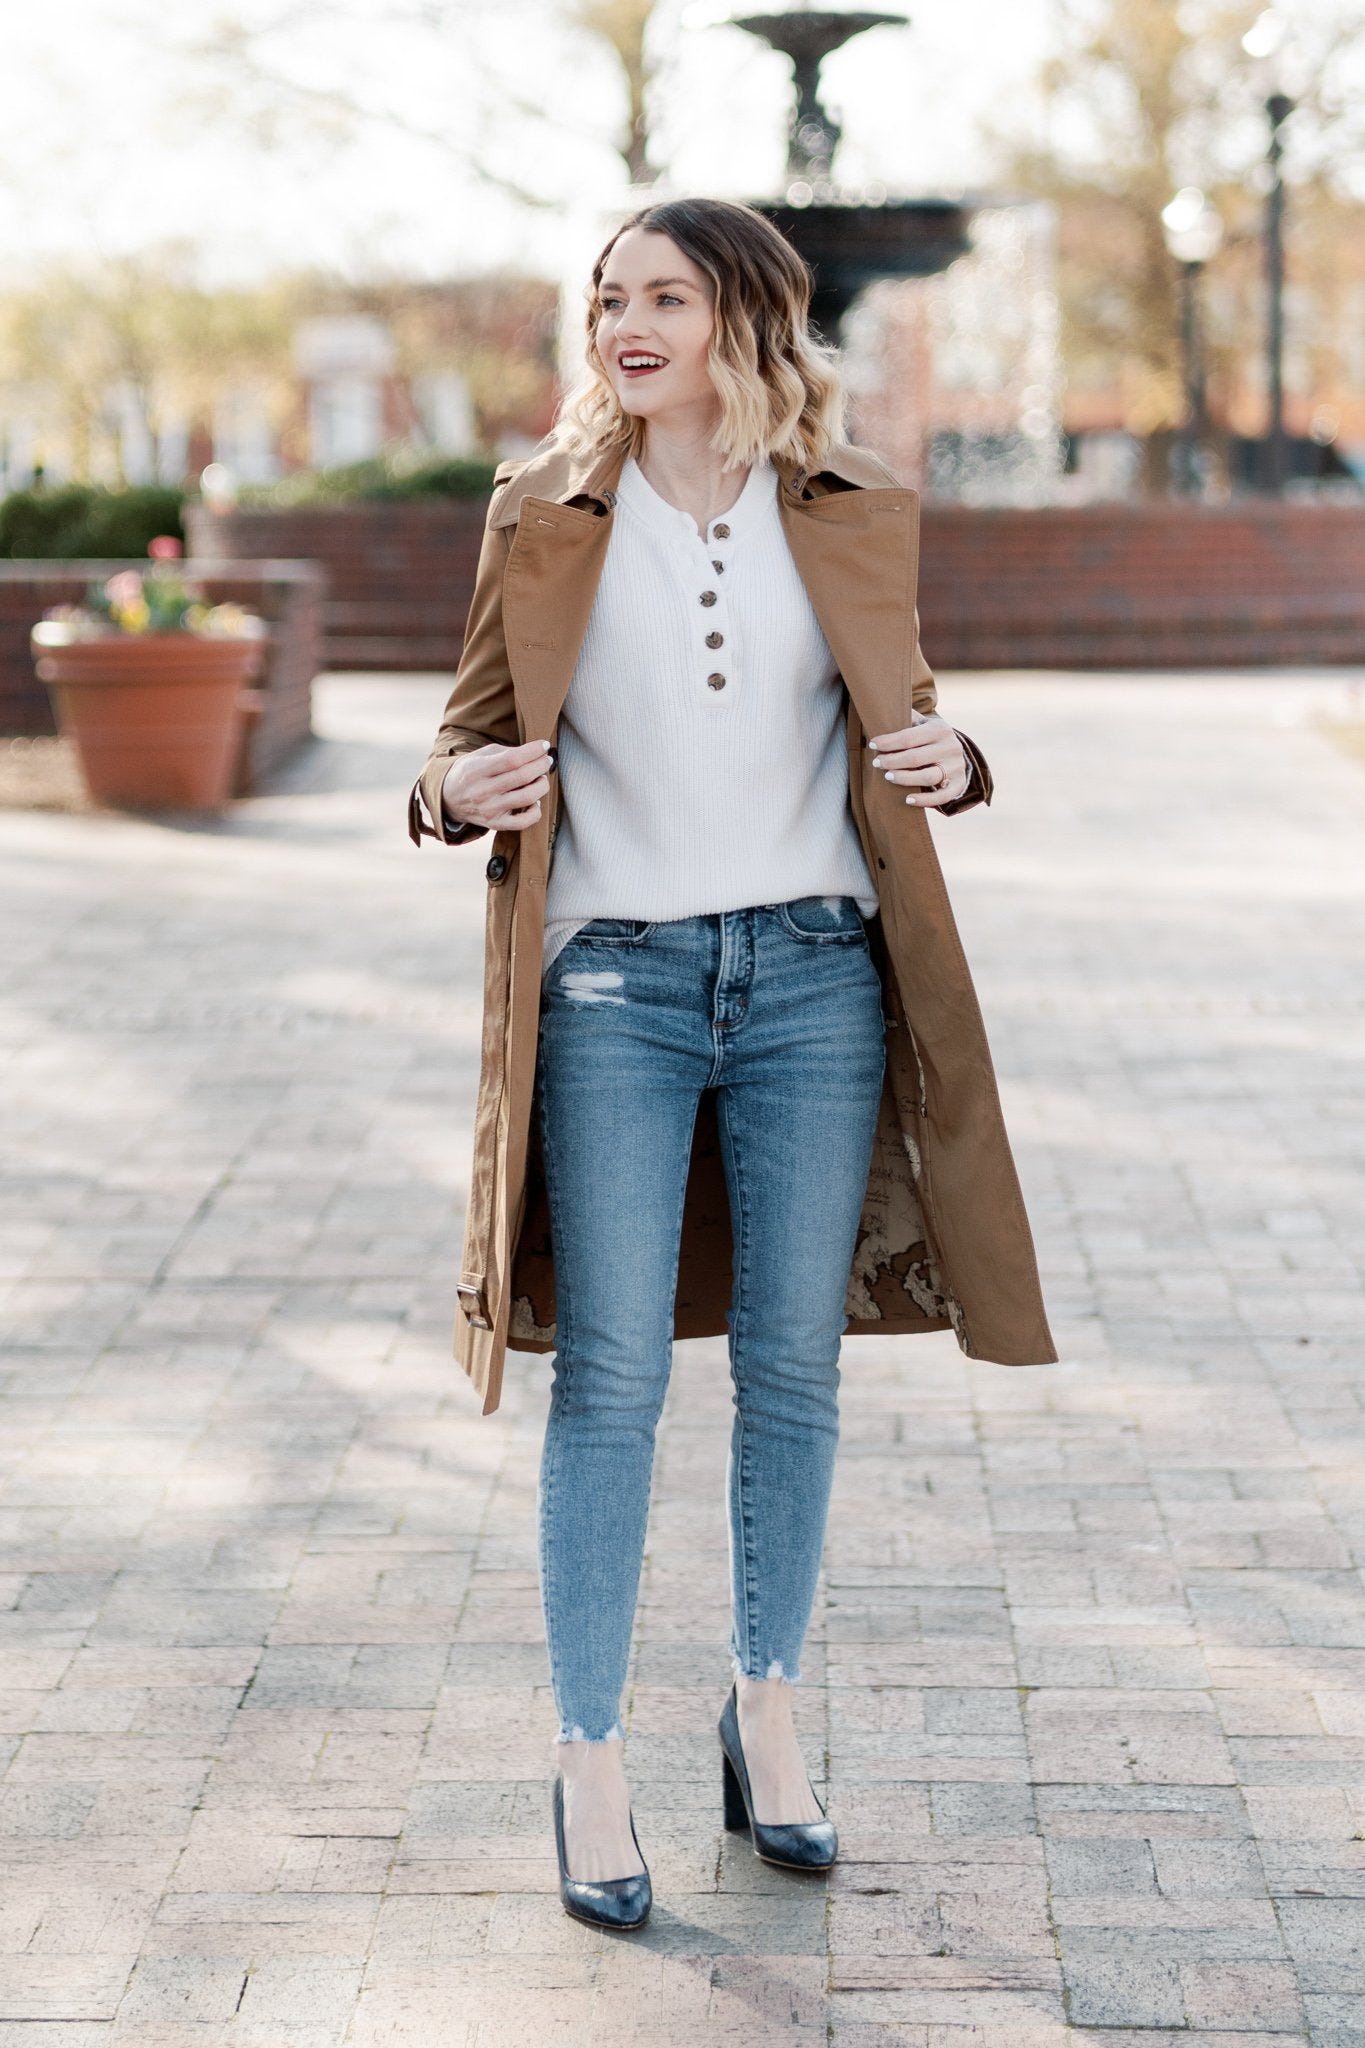 How To Style A Trench Coat When You're Petite | by Chicute | Medium